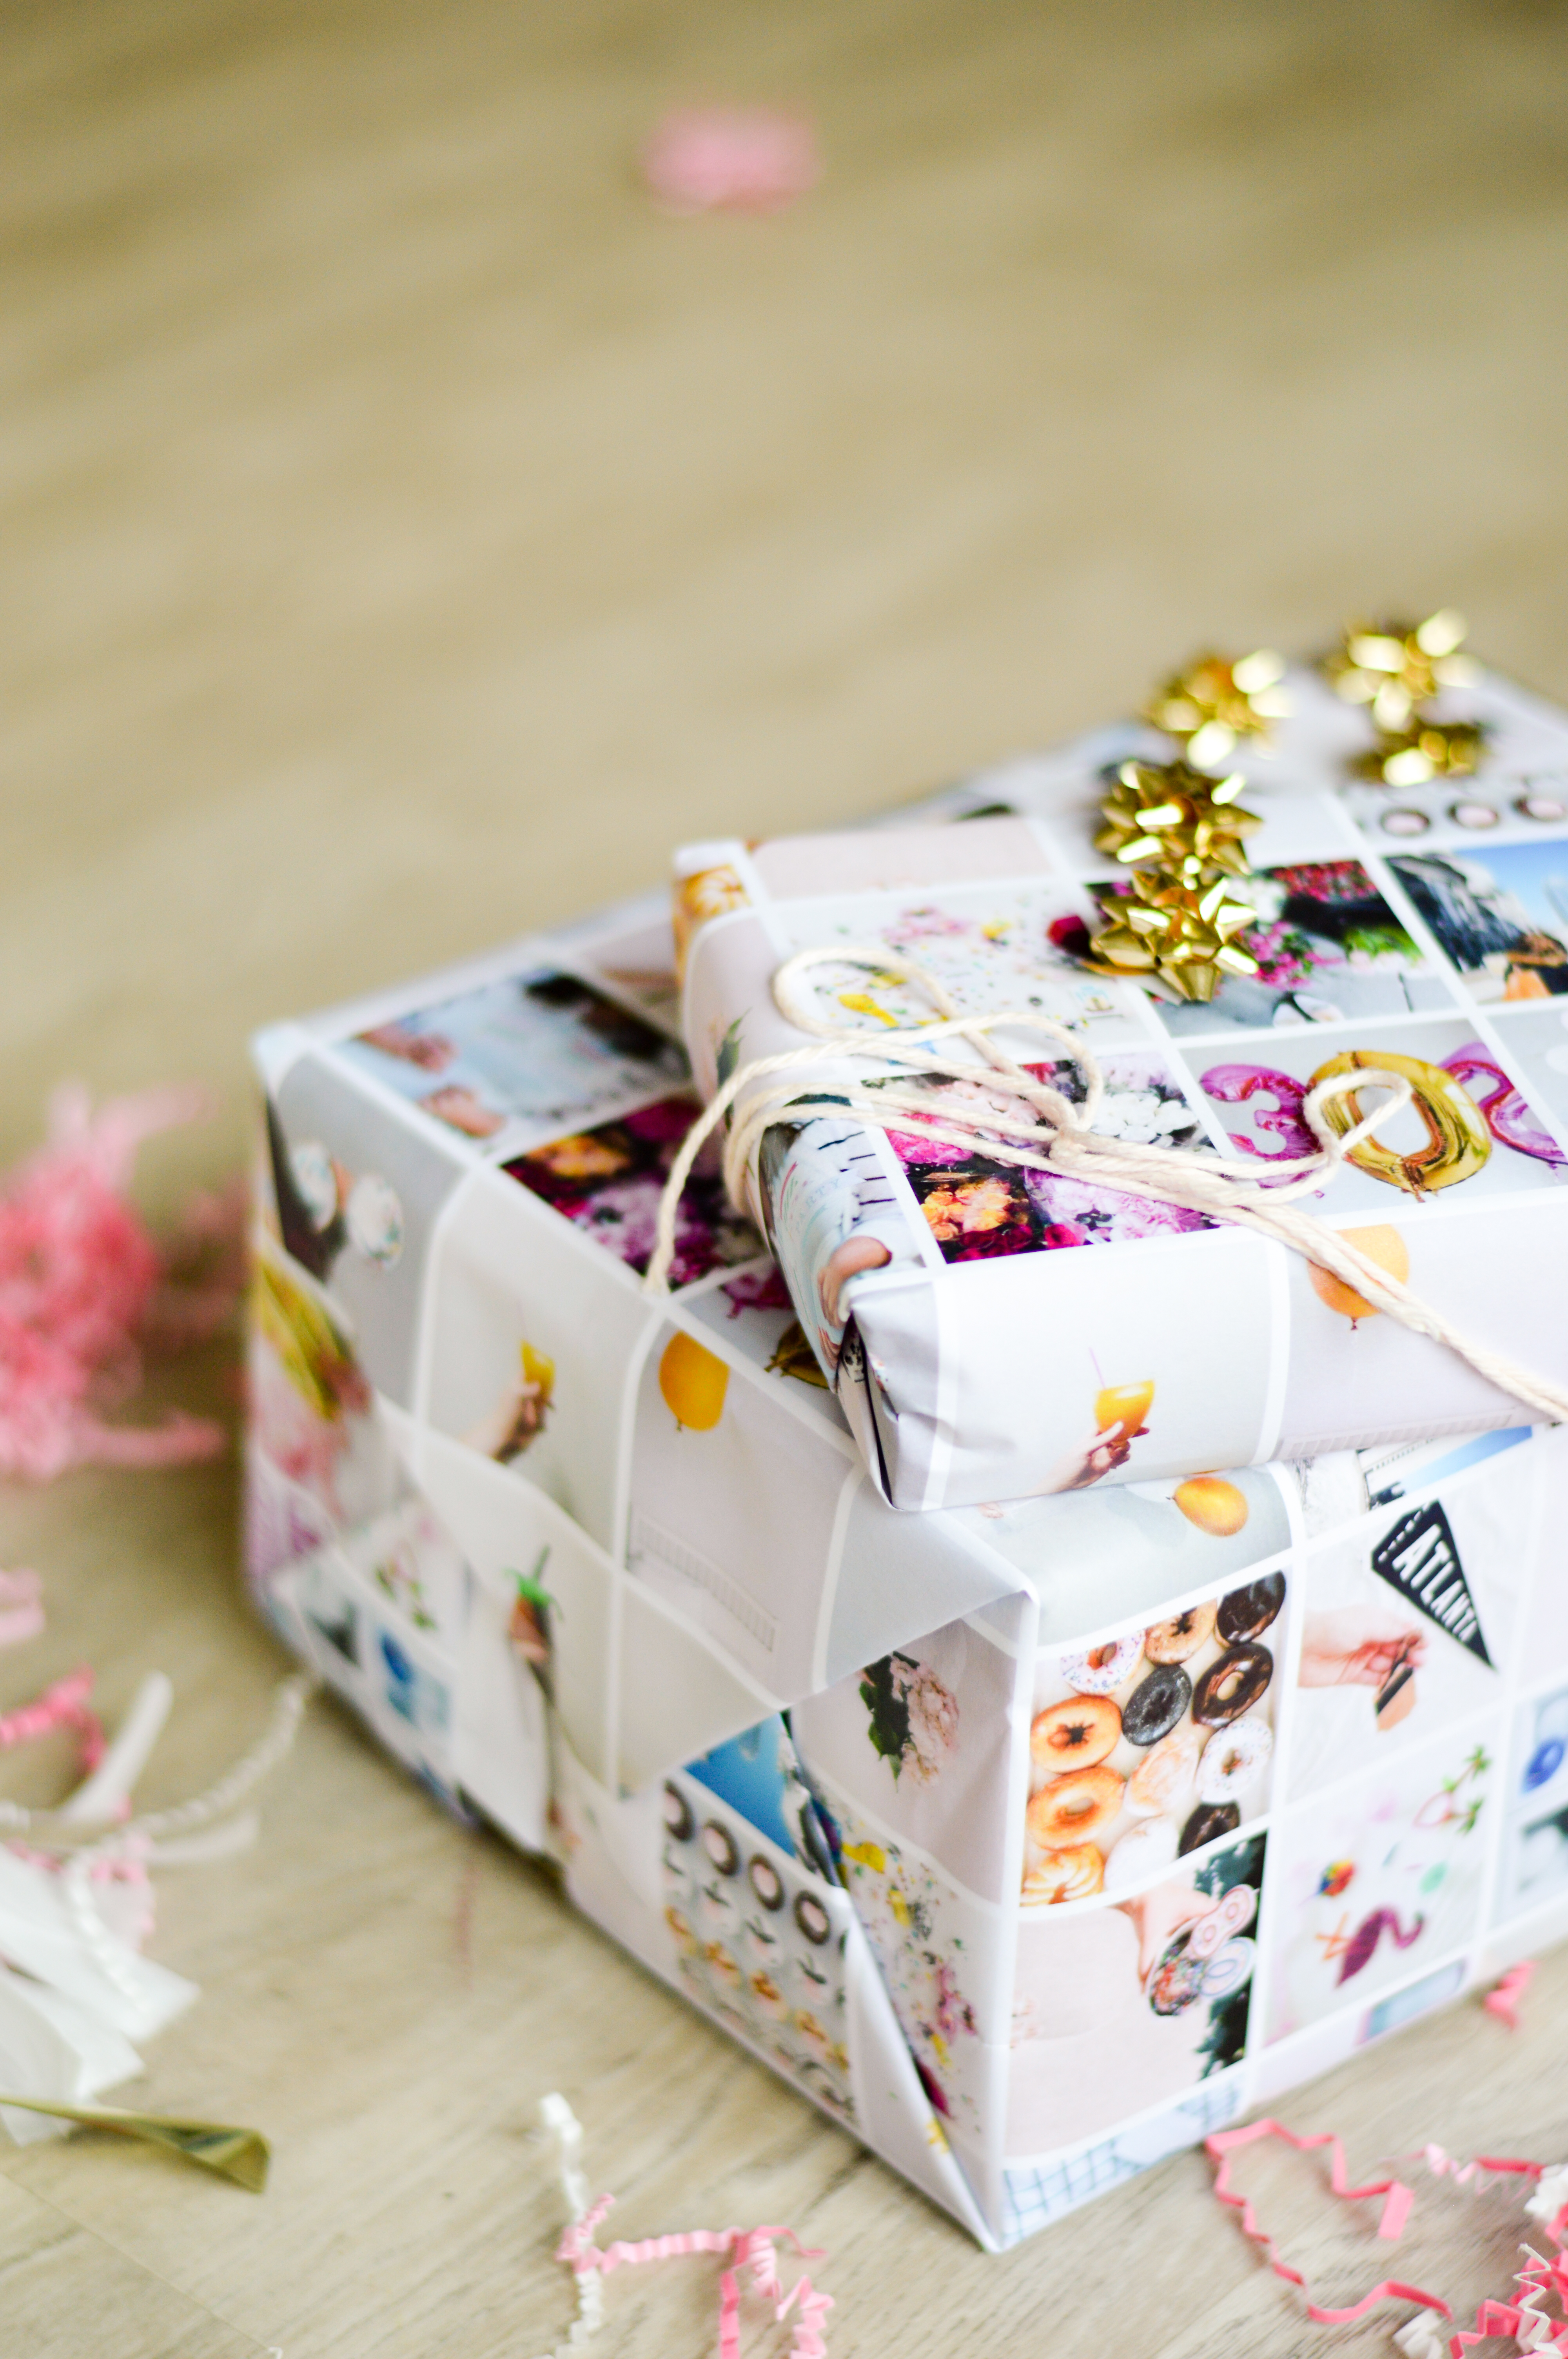 Step up your gift giving game with custom wrapping paper!